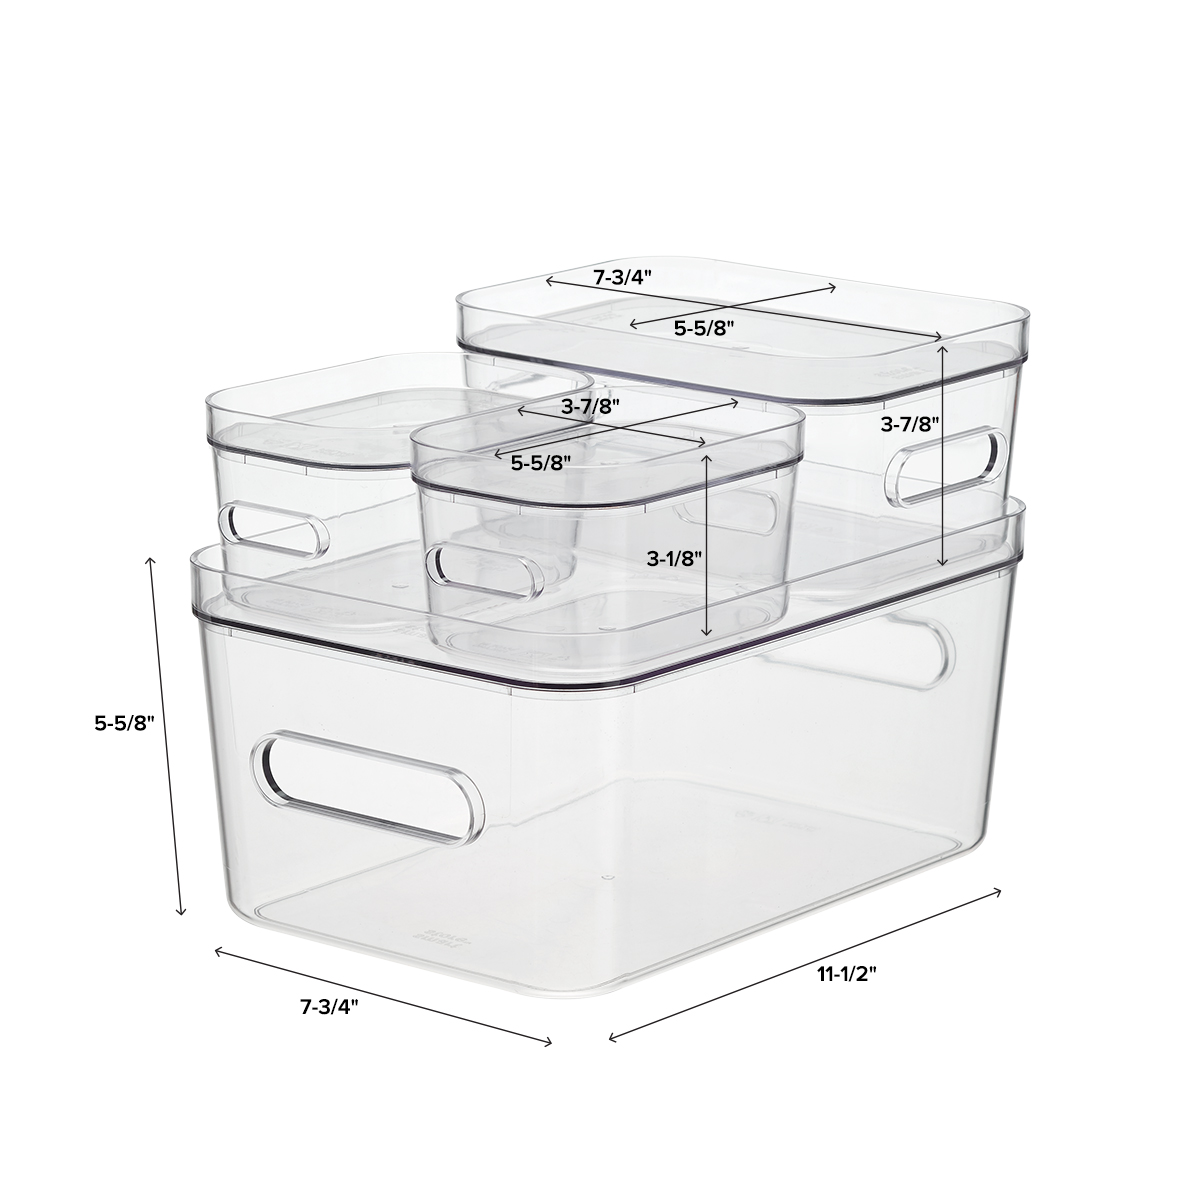 https://www.containerstore.com/catalogimages/449273/10077434-compact-plastic-bins-4pack-.jpg